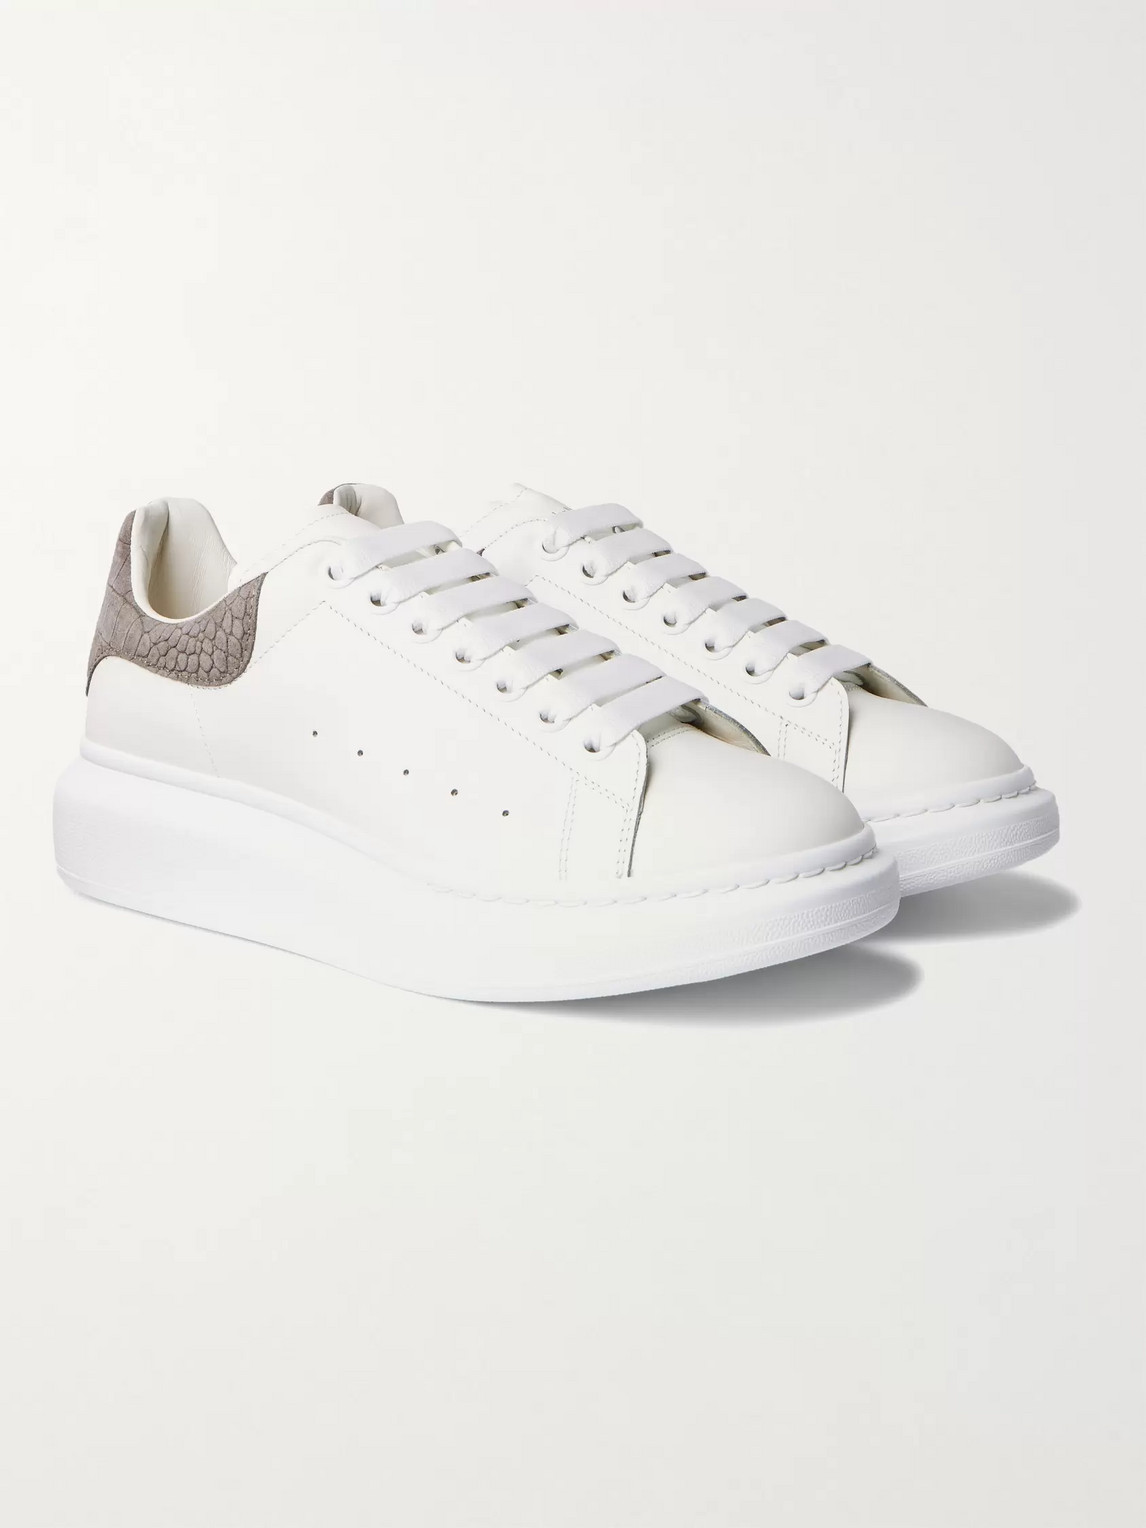 ALEXANDER MCQUEEN EXAGGERATED-SOLE CROC EFFECT SUEDE-TRIMMED LEATHER SNEAKERS